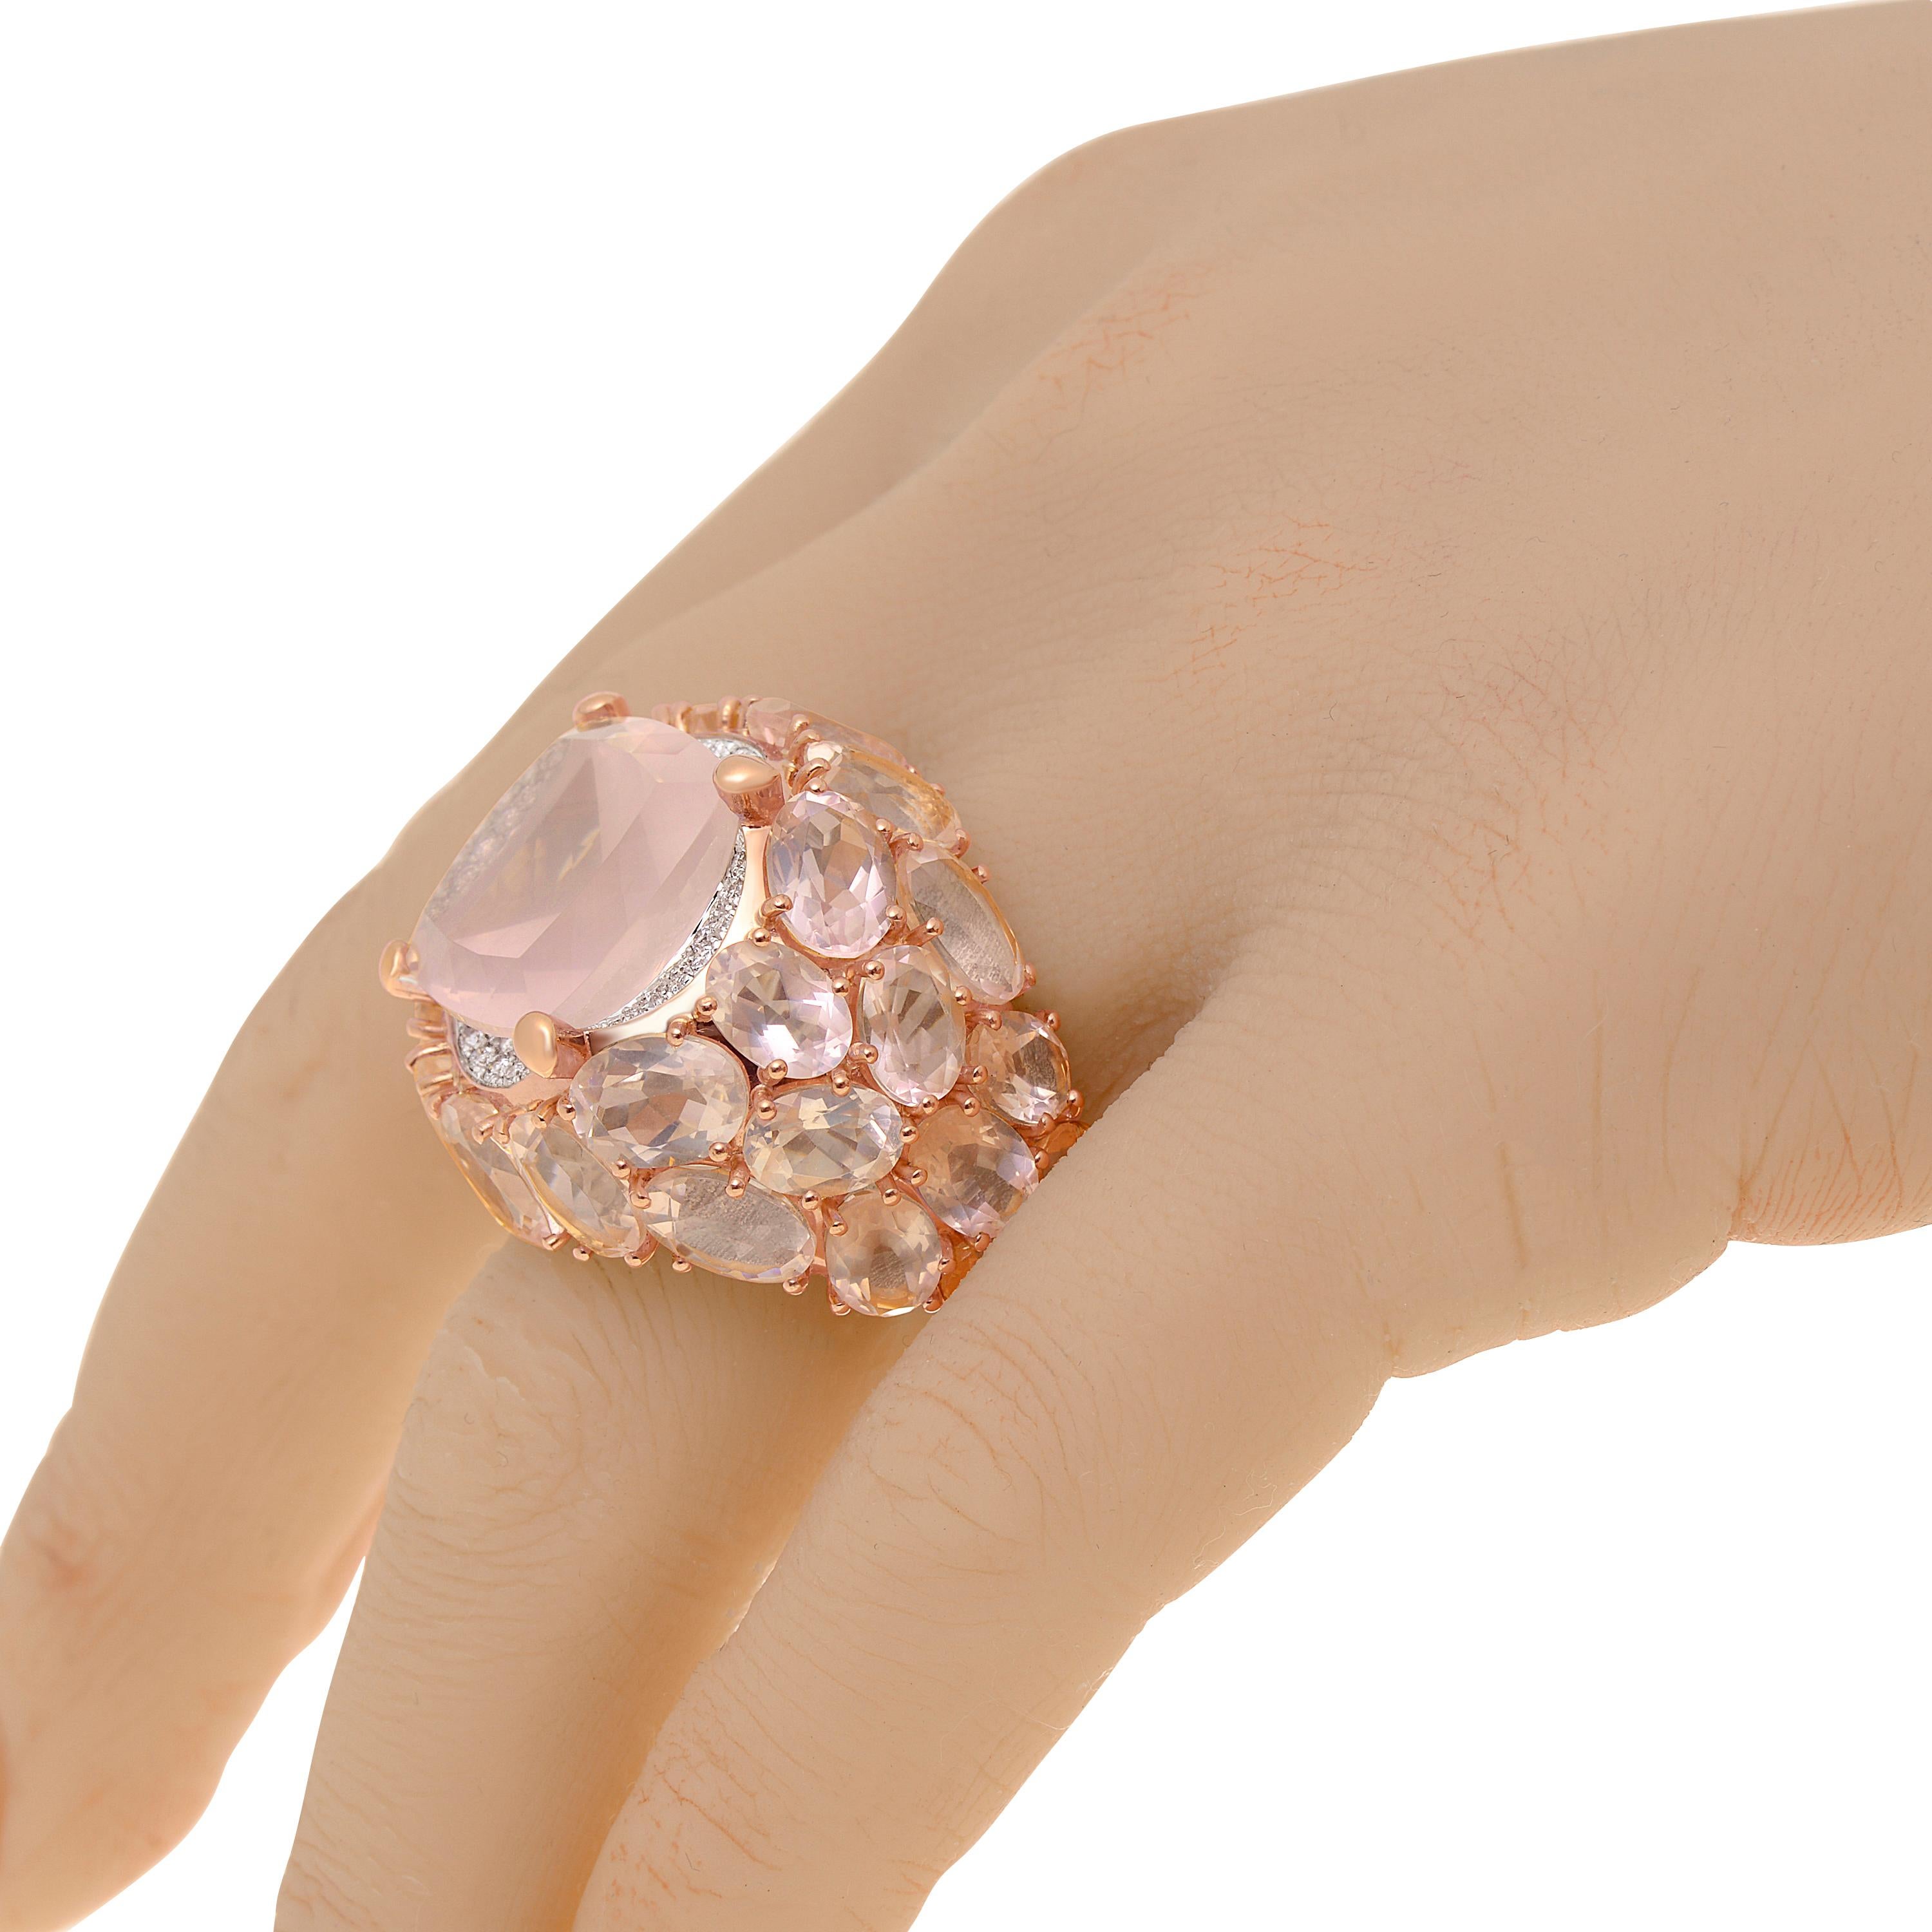 This bejeweled Mimi Milano 18K rose gold statement ring features Rose Quartz and 0.44ct. tw. diamonds set in 18K rose gold. The ring size is 7.25 (54). The band width is 3/8